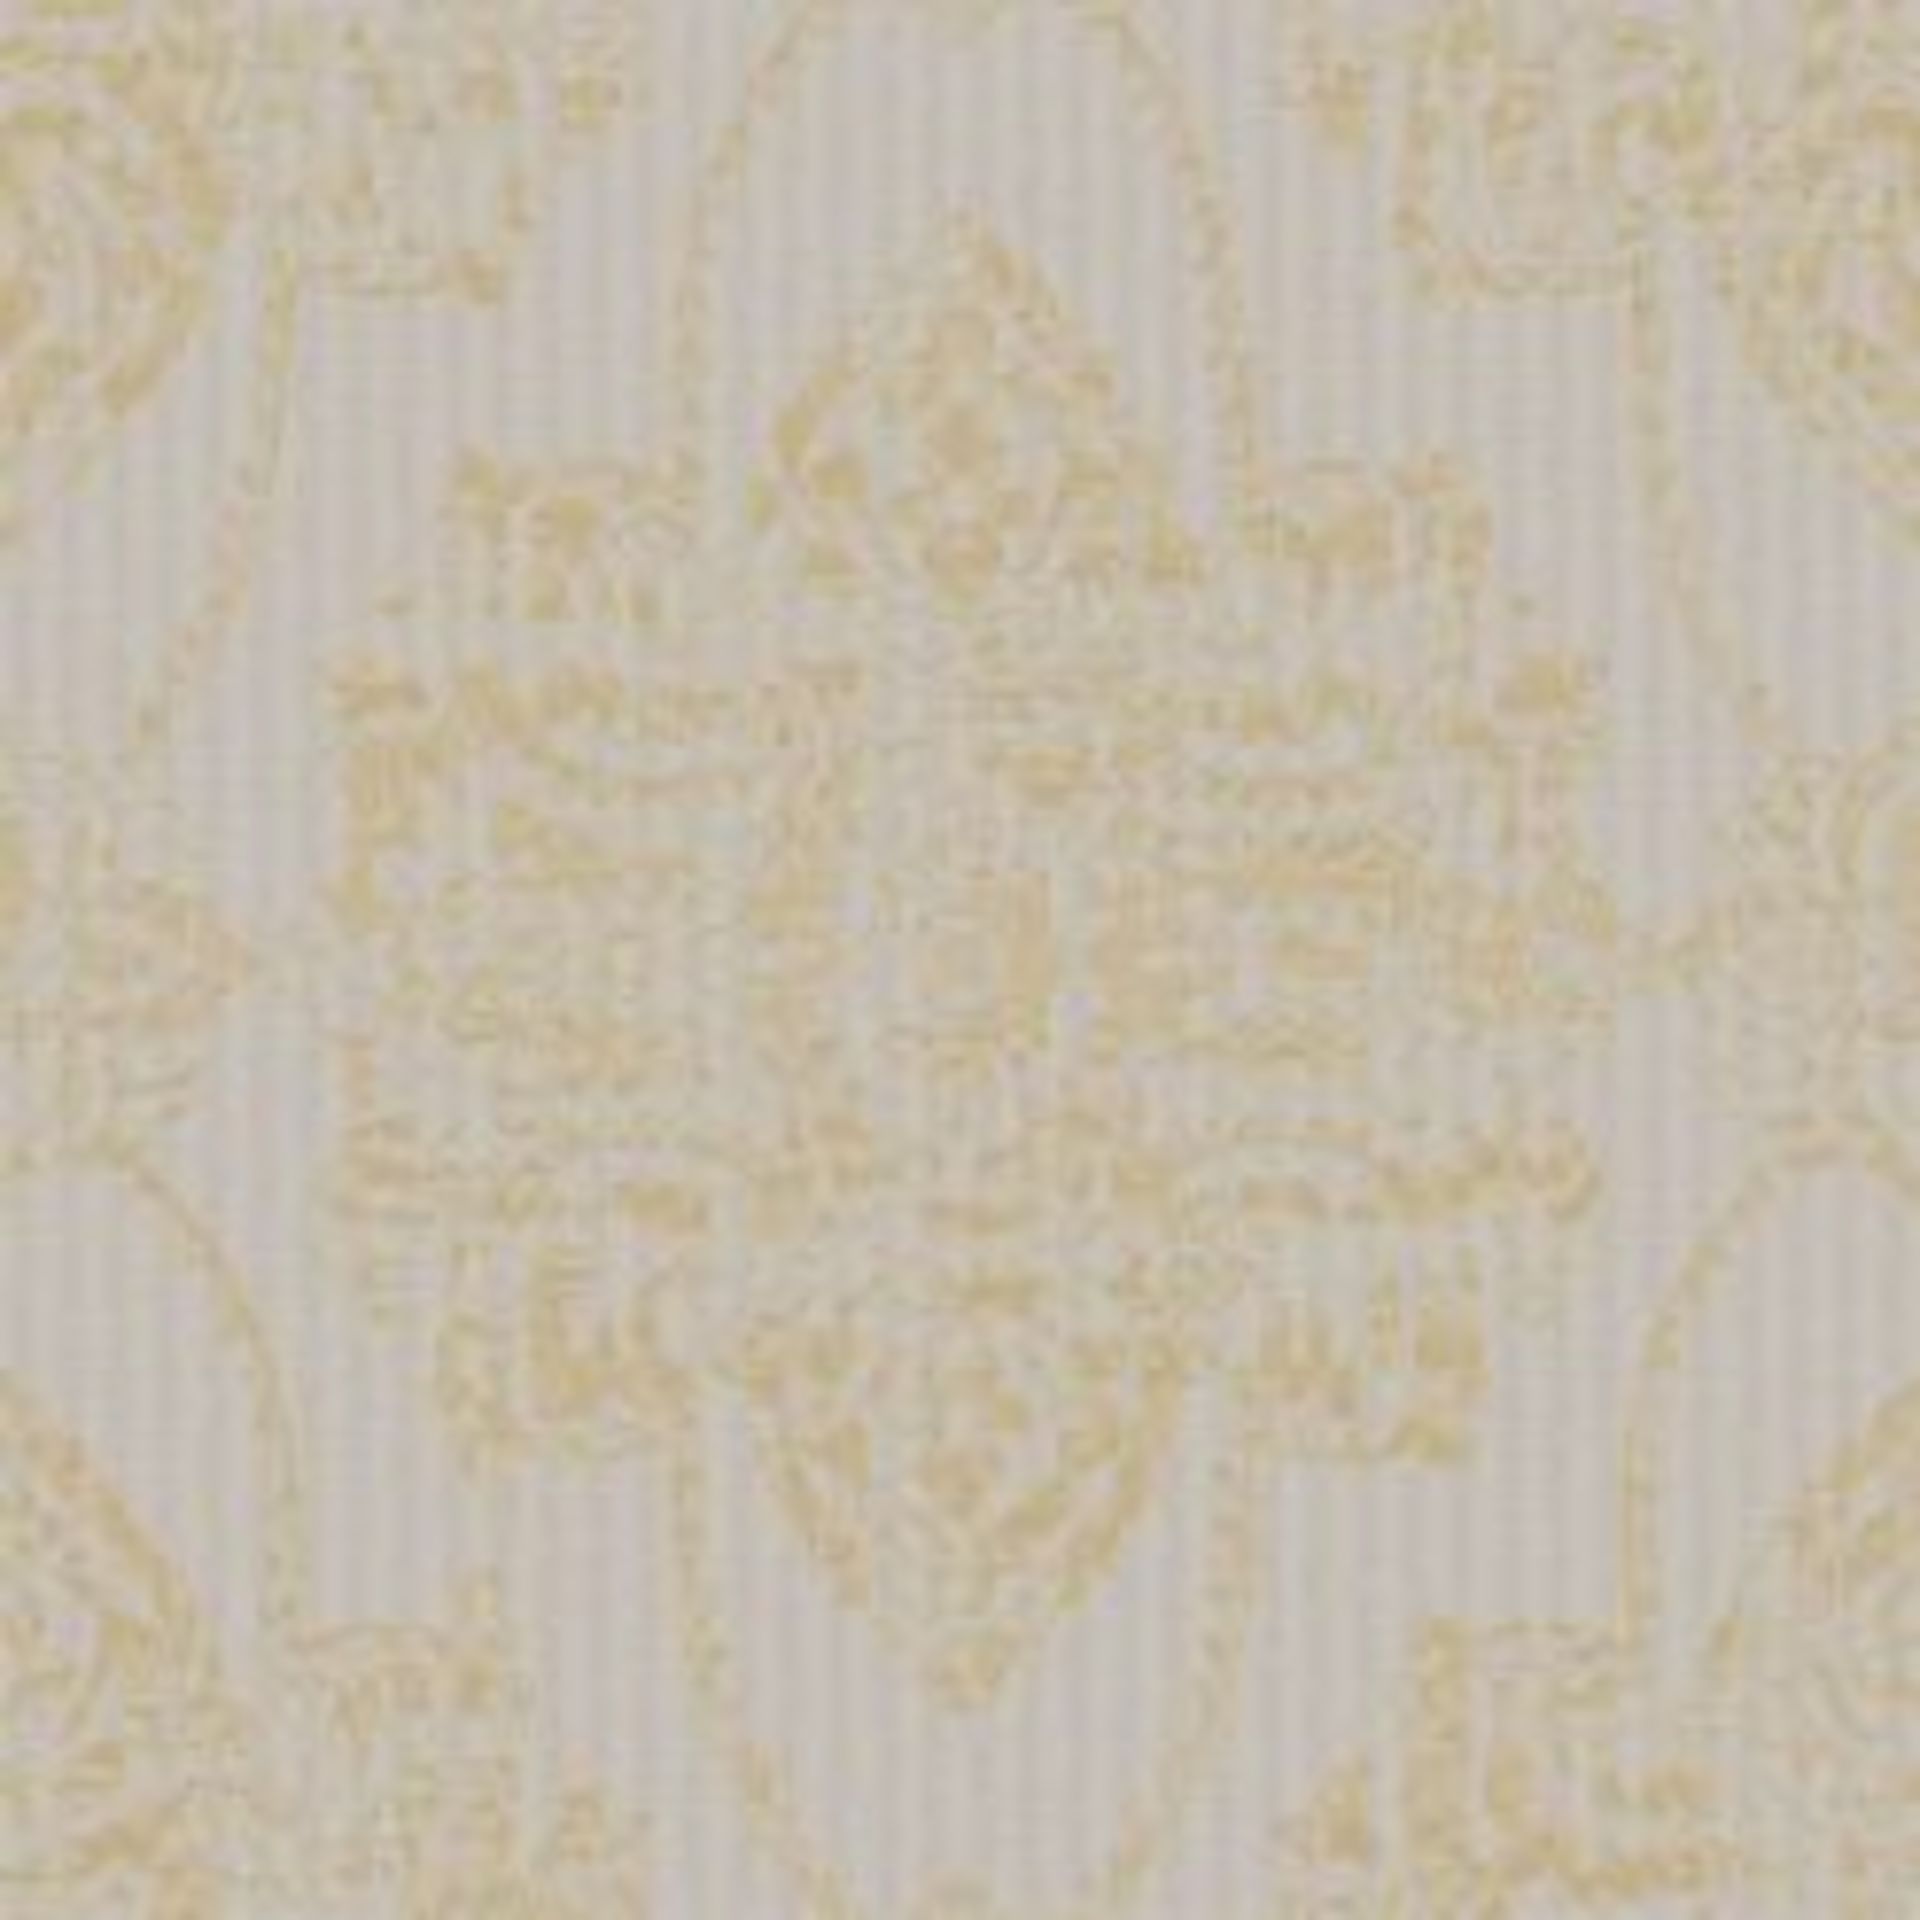 202 Rolls of Dalia Wallpaper (Bays 1147 – 1206) (Library Images – Some Colours May Not Be Present in - Image 17 of 37